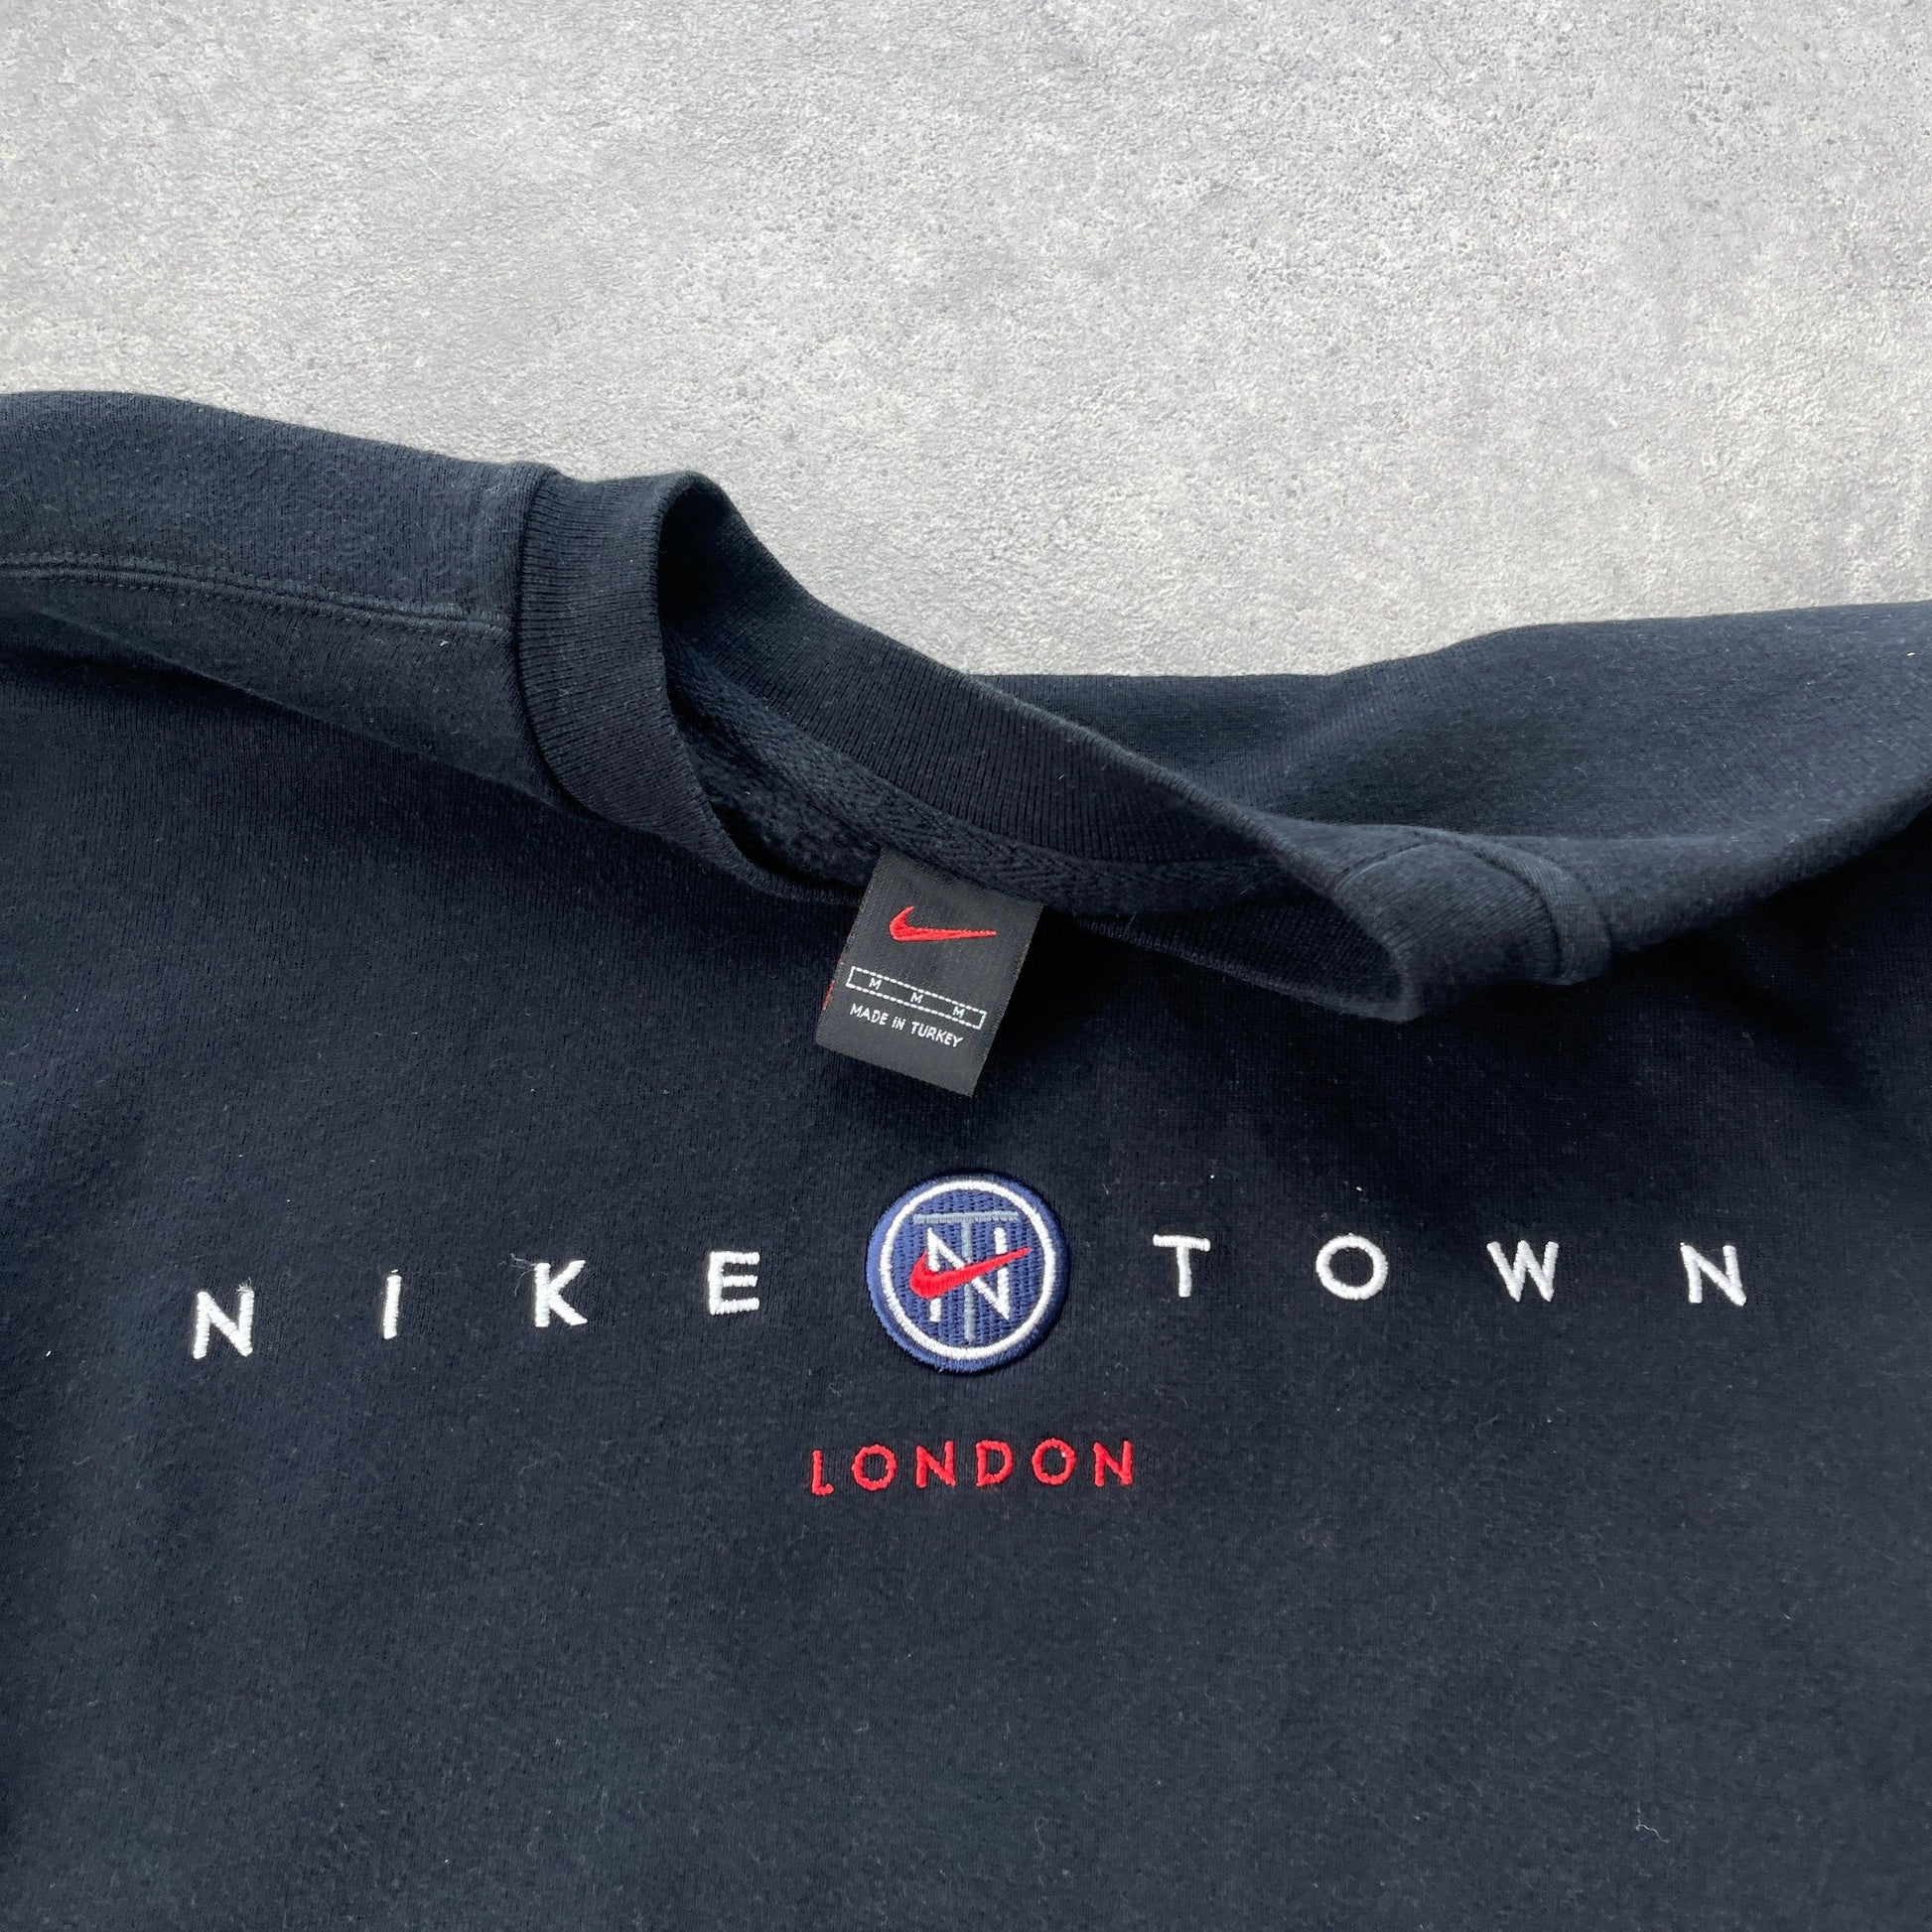 Nike Town London RARE 1990s heavyweight embroidered sweatshirt (M) - Known Source